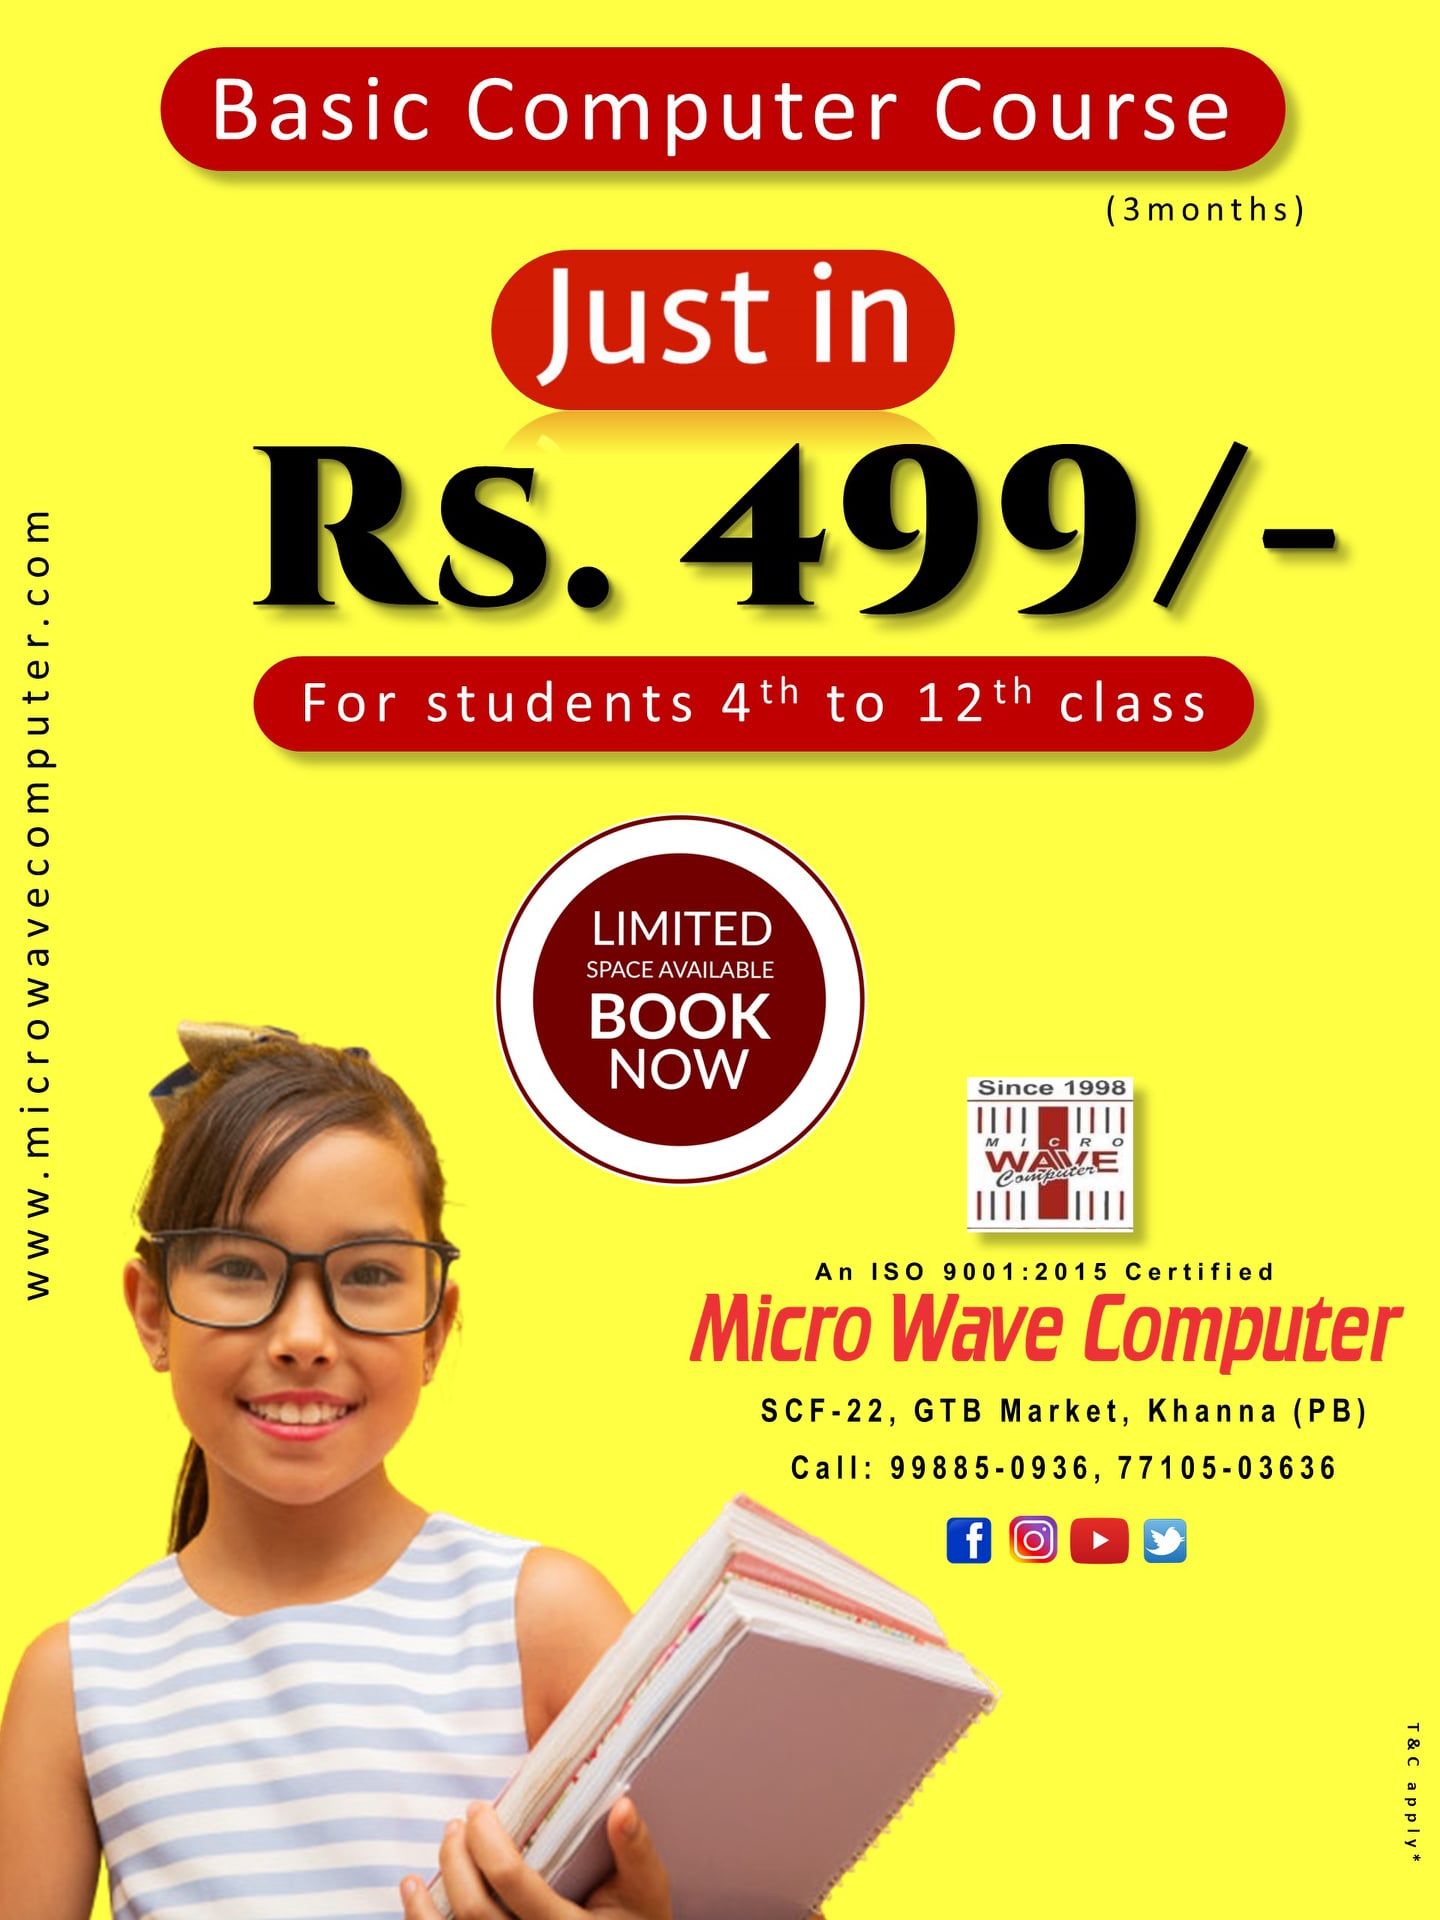 Join Online Basic Computer Course in Khanna